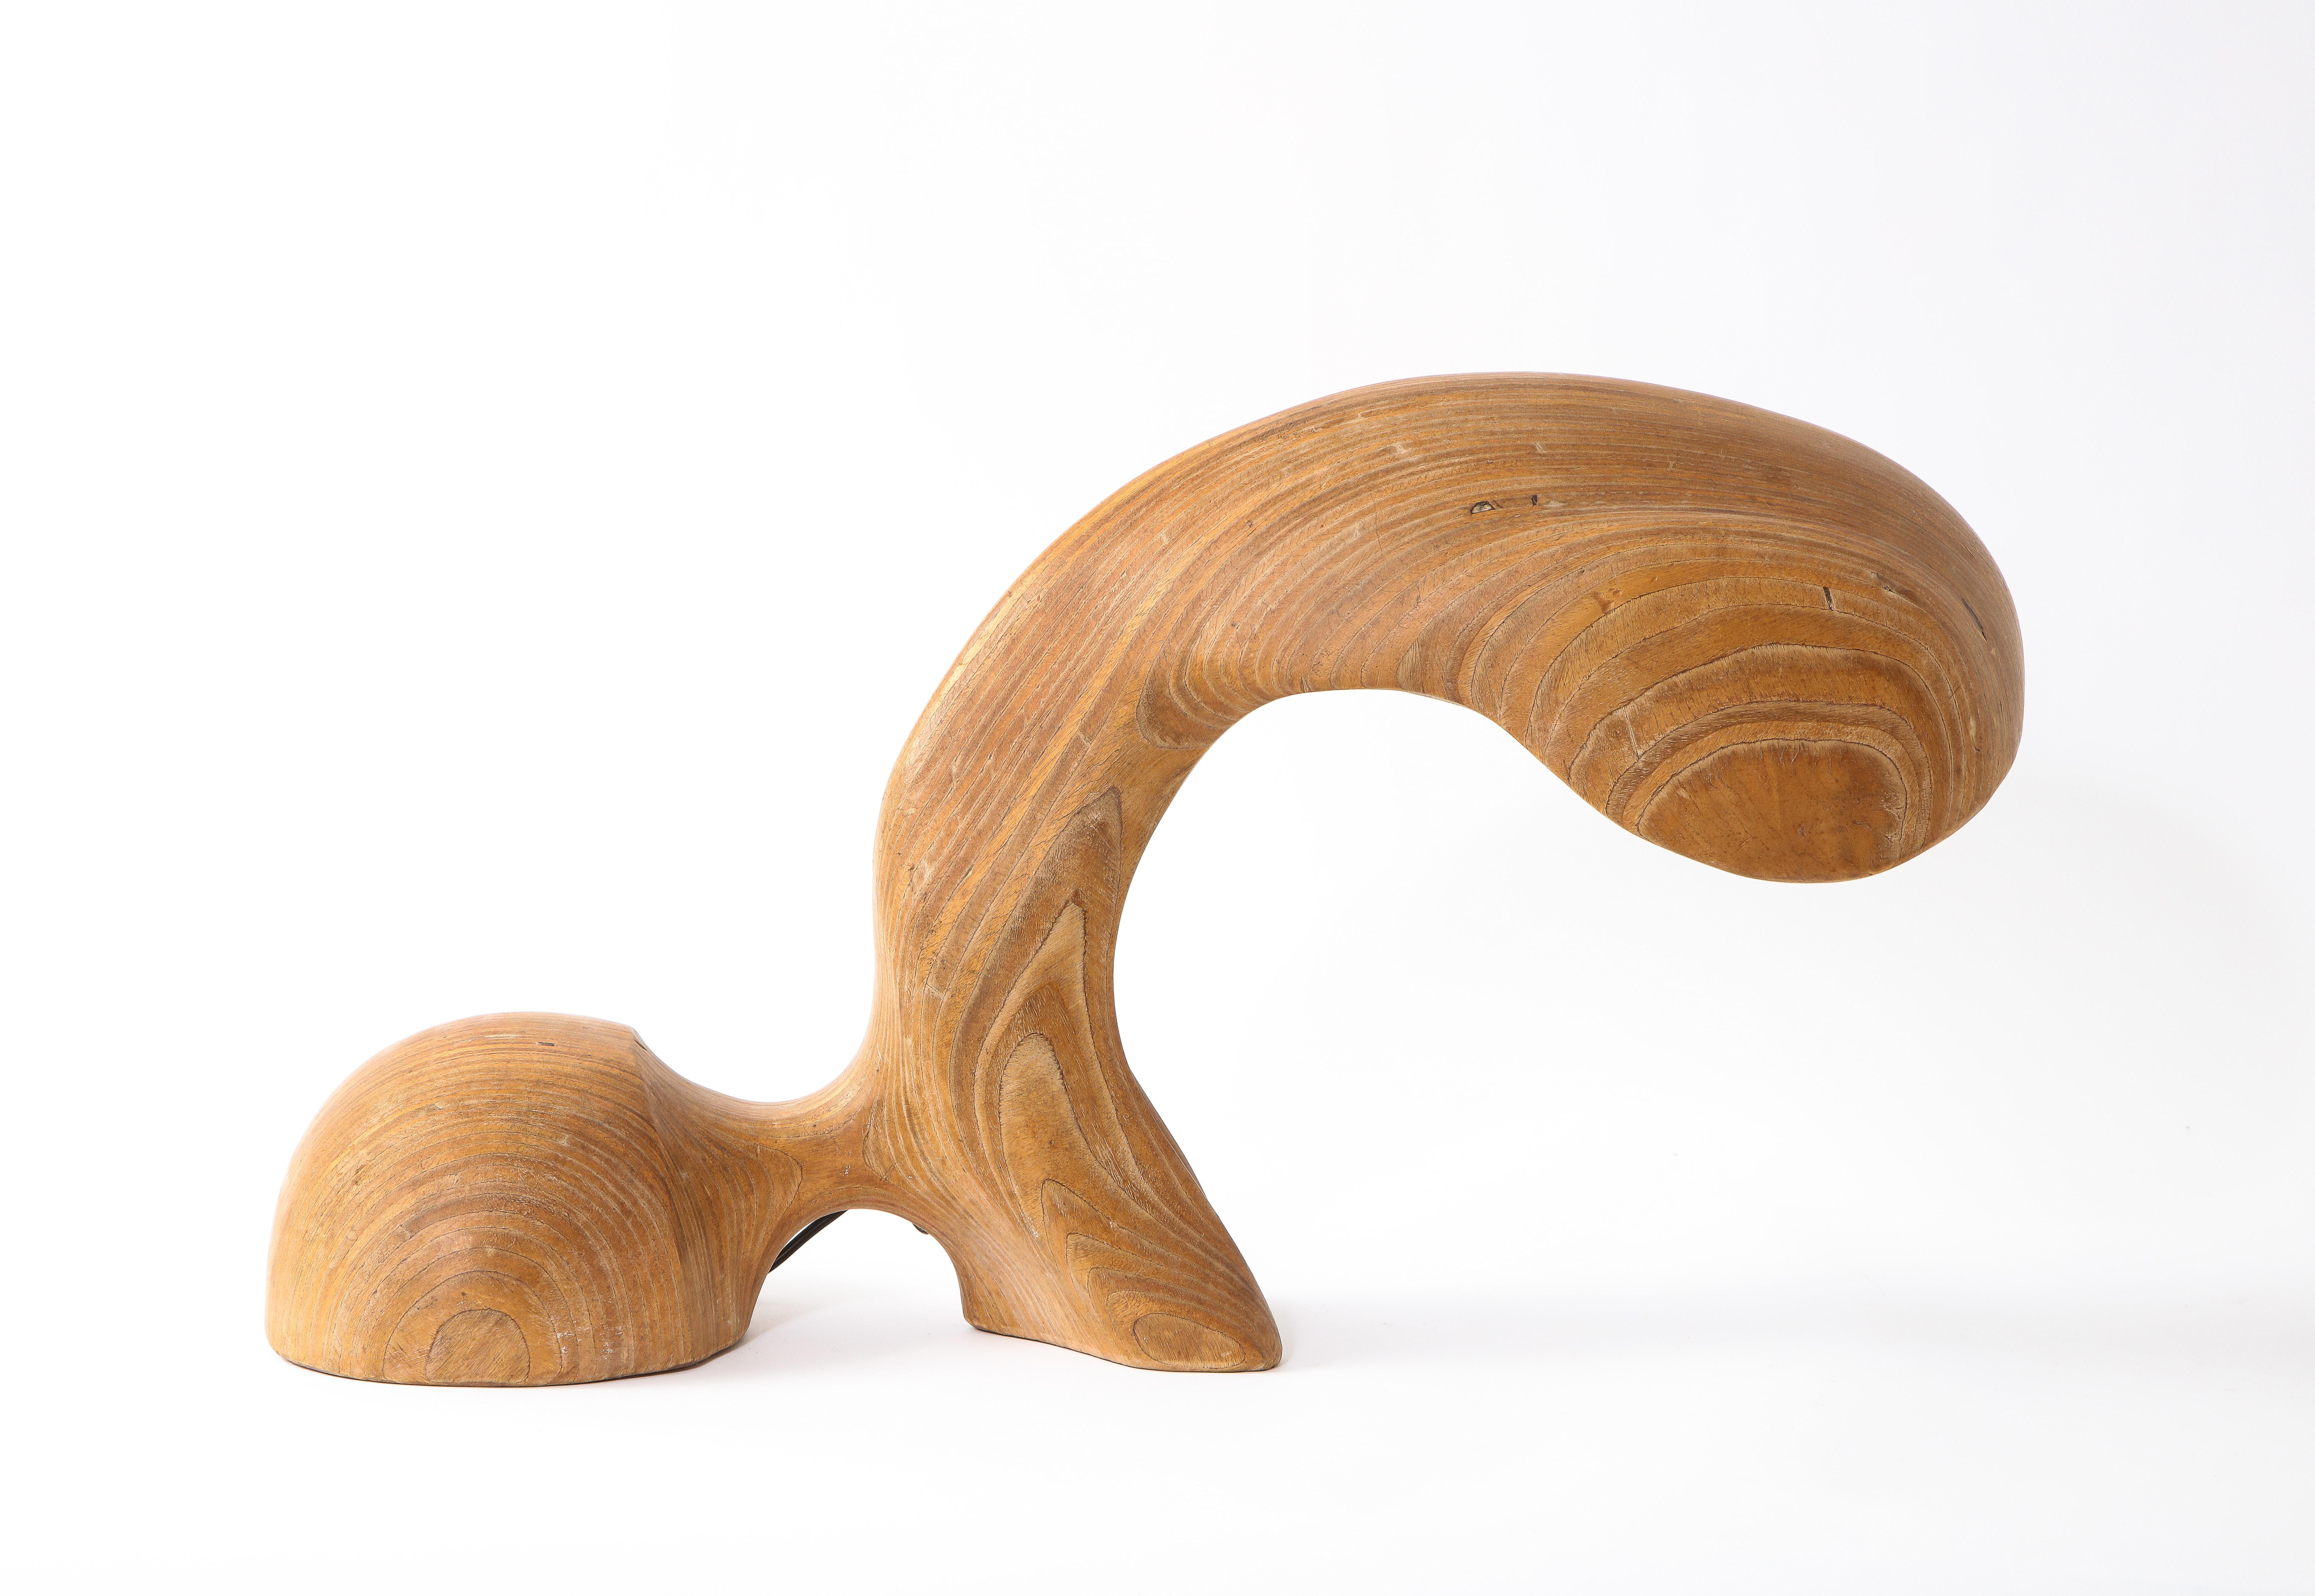 Biomorphic table lamp, hand carved out of a laminated block of various essences of wood. Cospen's work is reminiscent of the form experiments of Luigi Colani. Rewired.